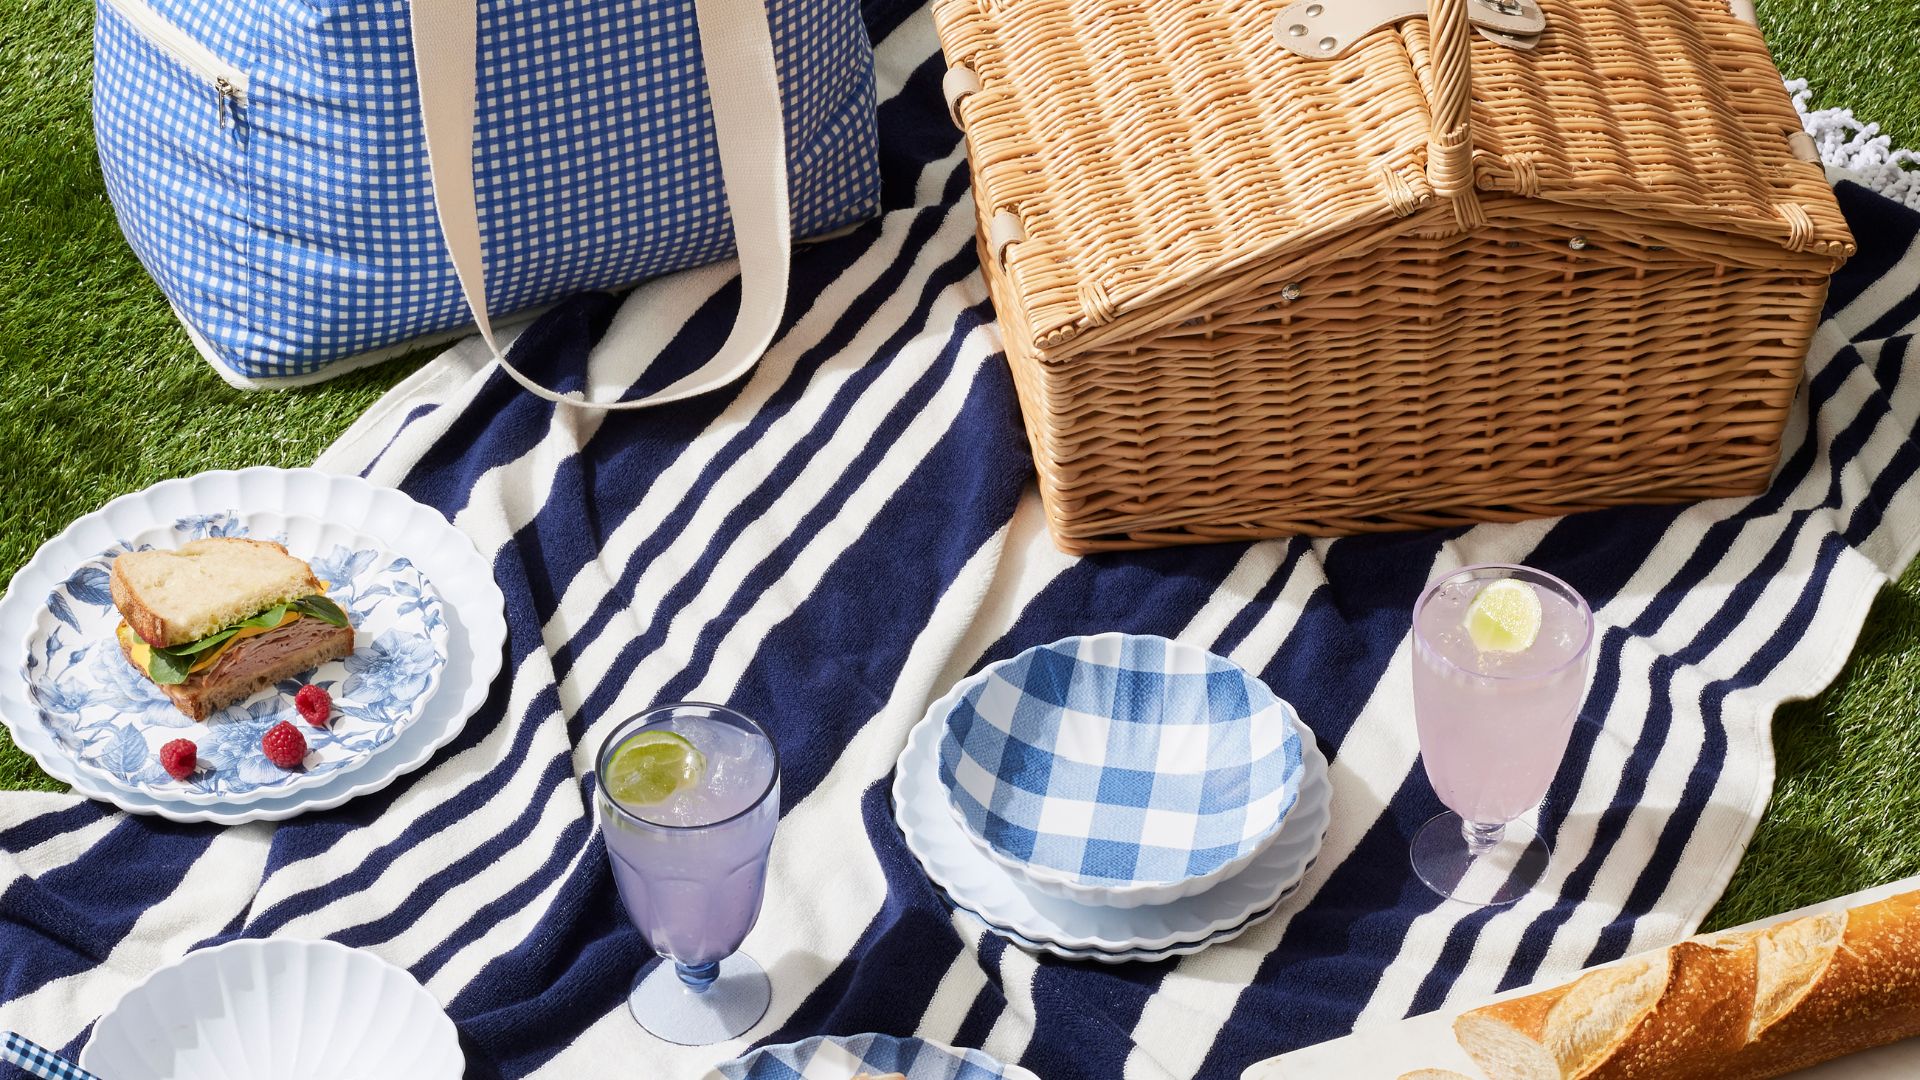 The Ultimate Guide To Picnicking This Summer + 5 Must-Haves To Bring To Your Next Picnic